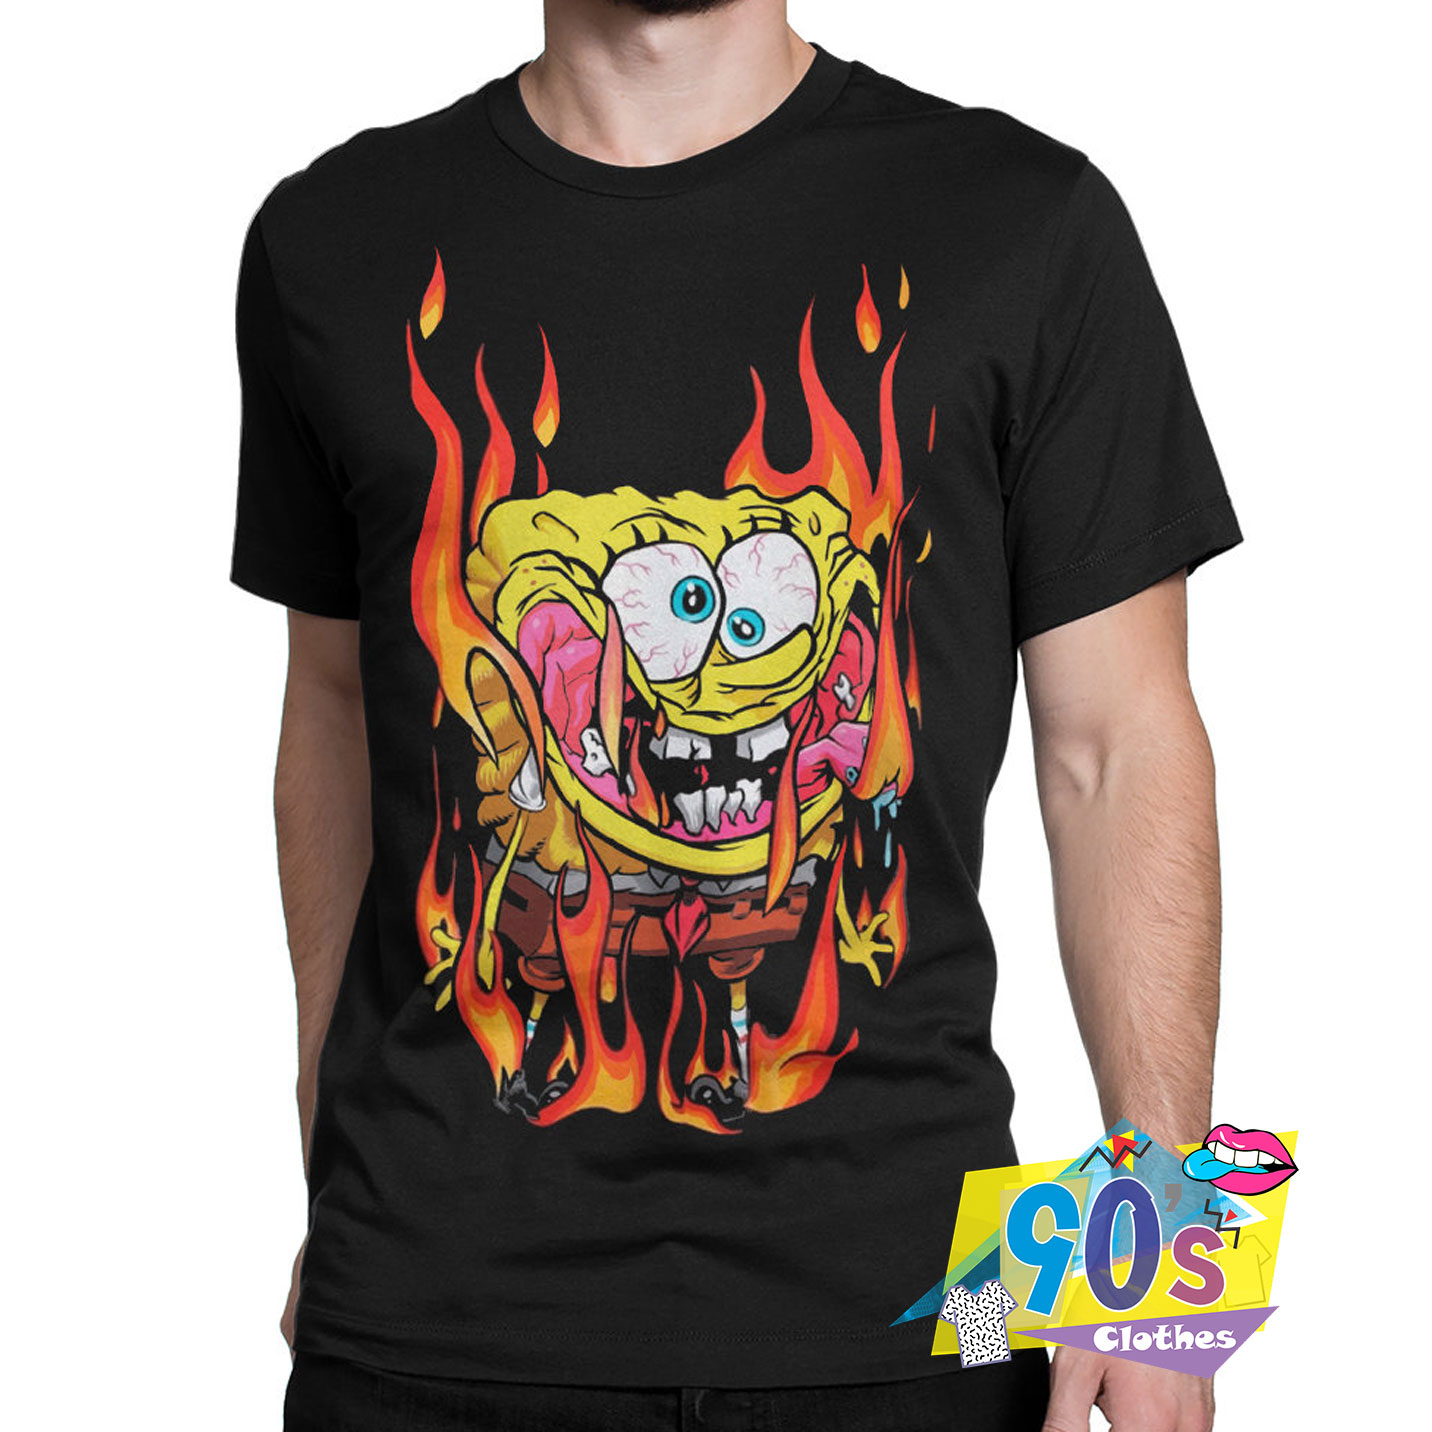 Awesome Hot Angry Spongebob T Shirt On Sale 